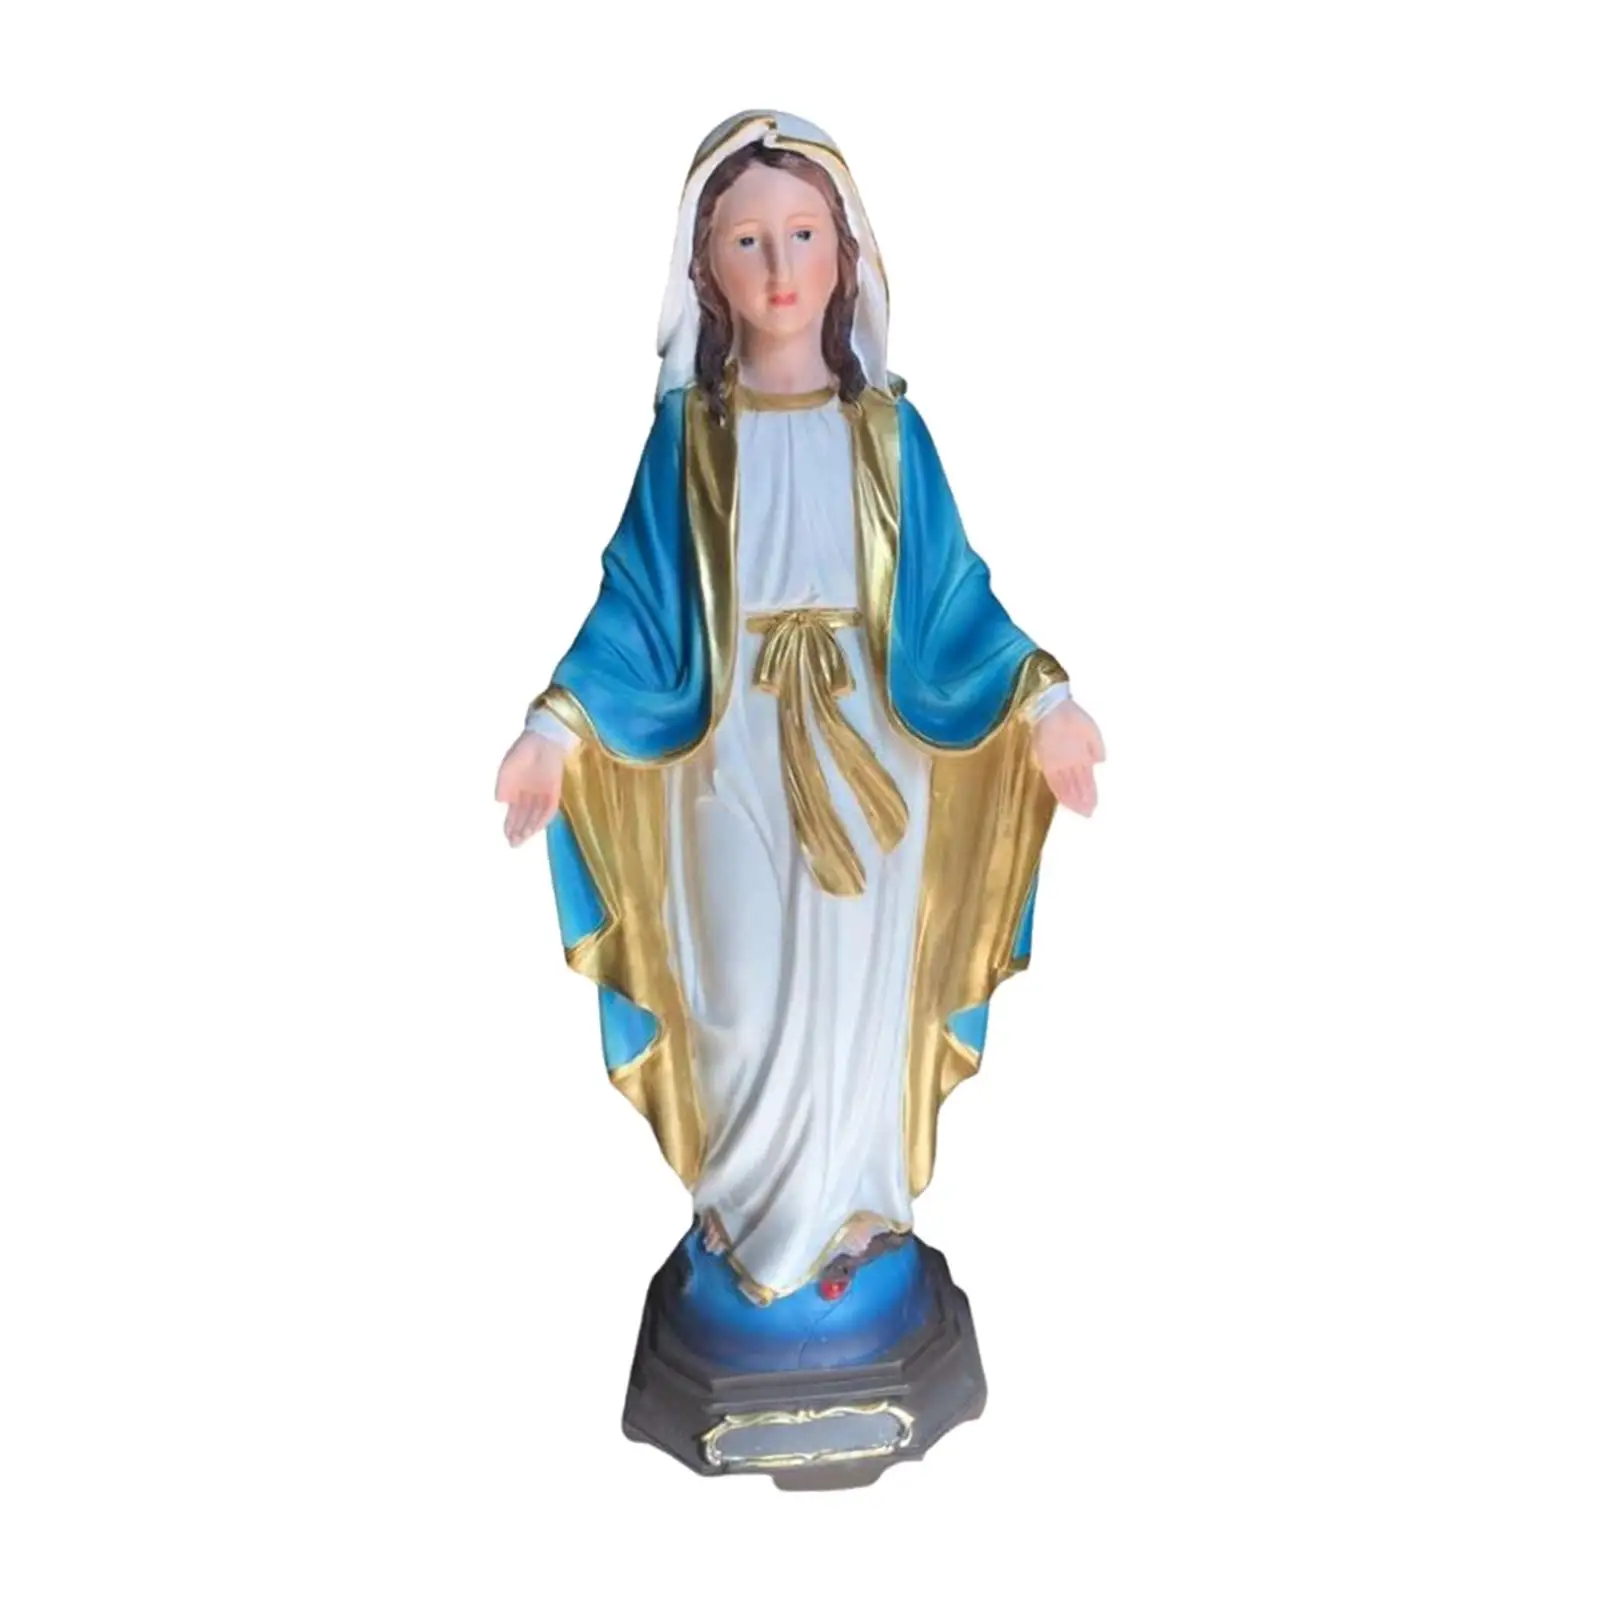 Holy Mother Mary Figurine Character Sculpture Collectable Mother Day Decorations